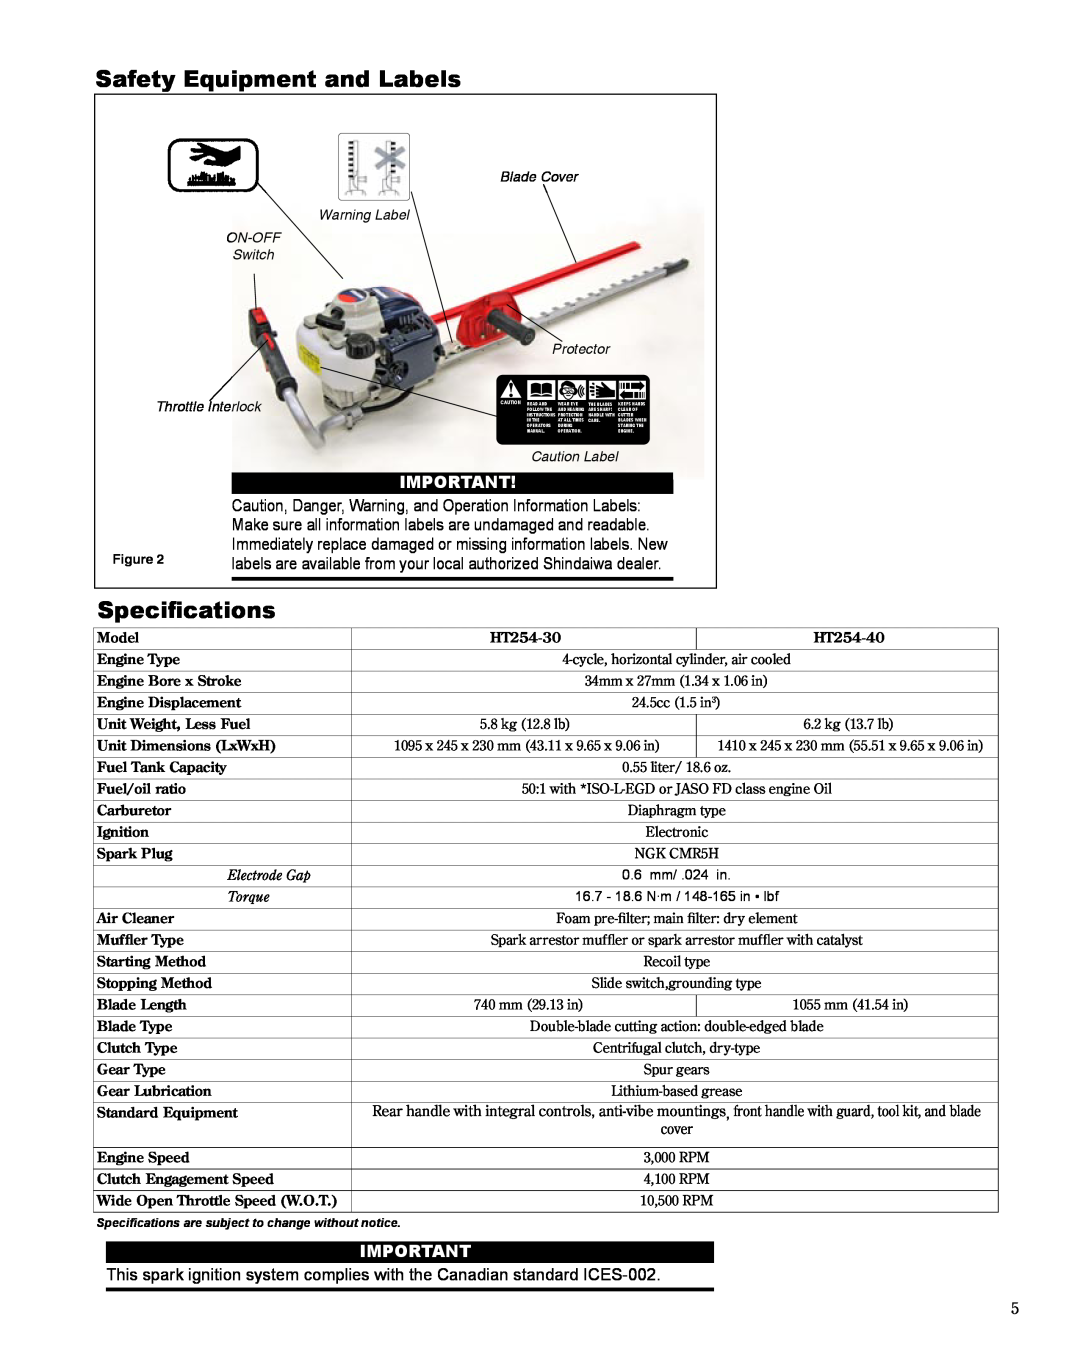 Shindaiwa X7502864200, HT254EF manual Safety Equipment and Labels, Specifications, Electrode Gap, Torque 